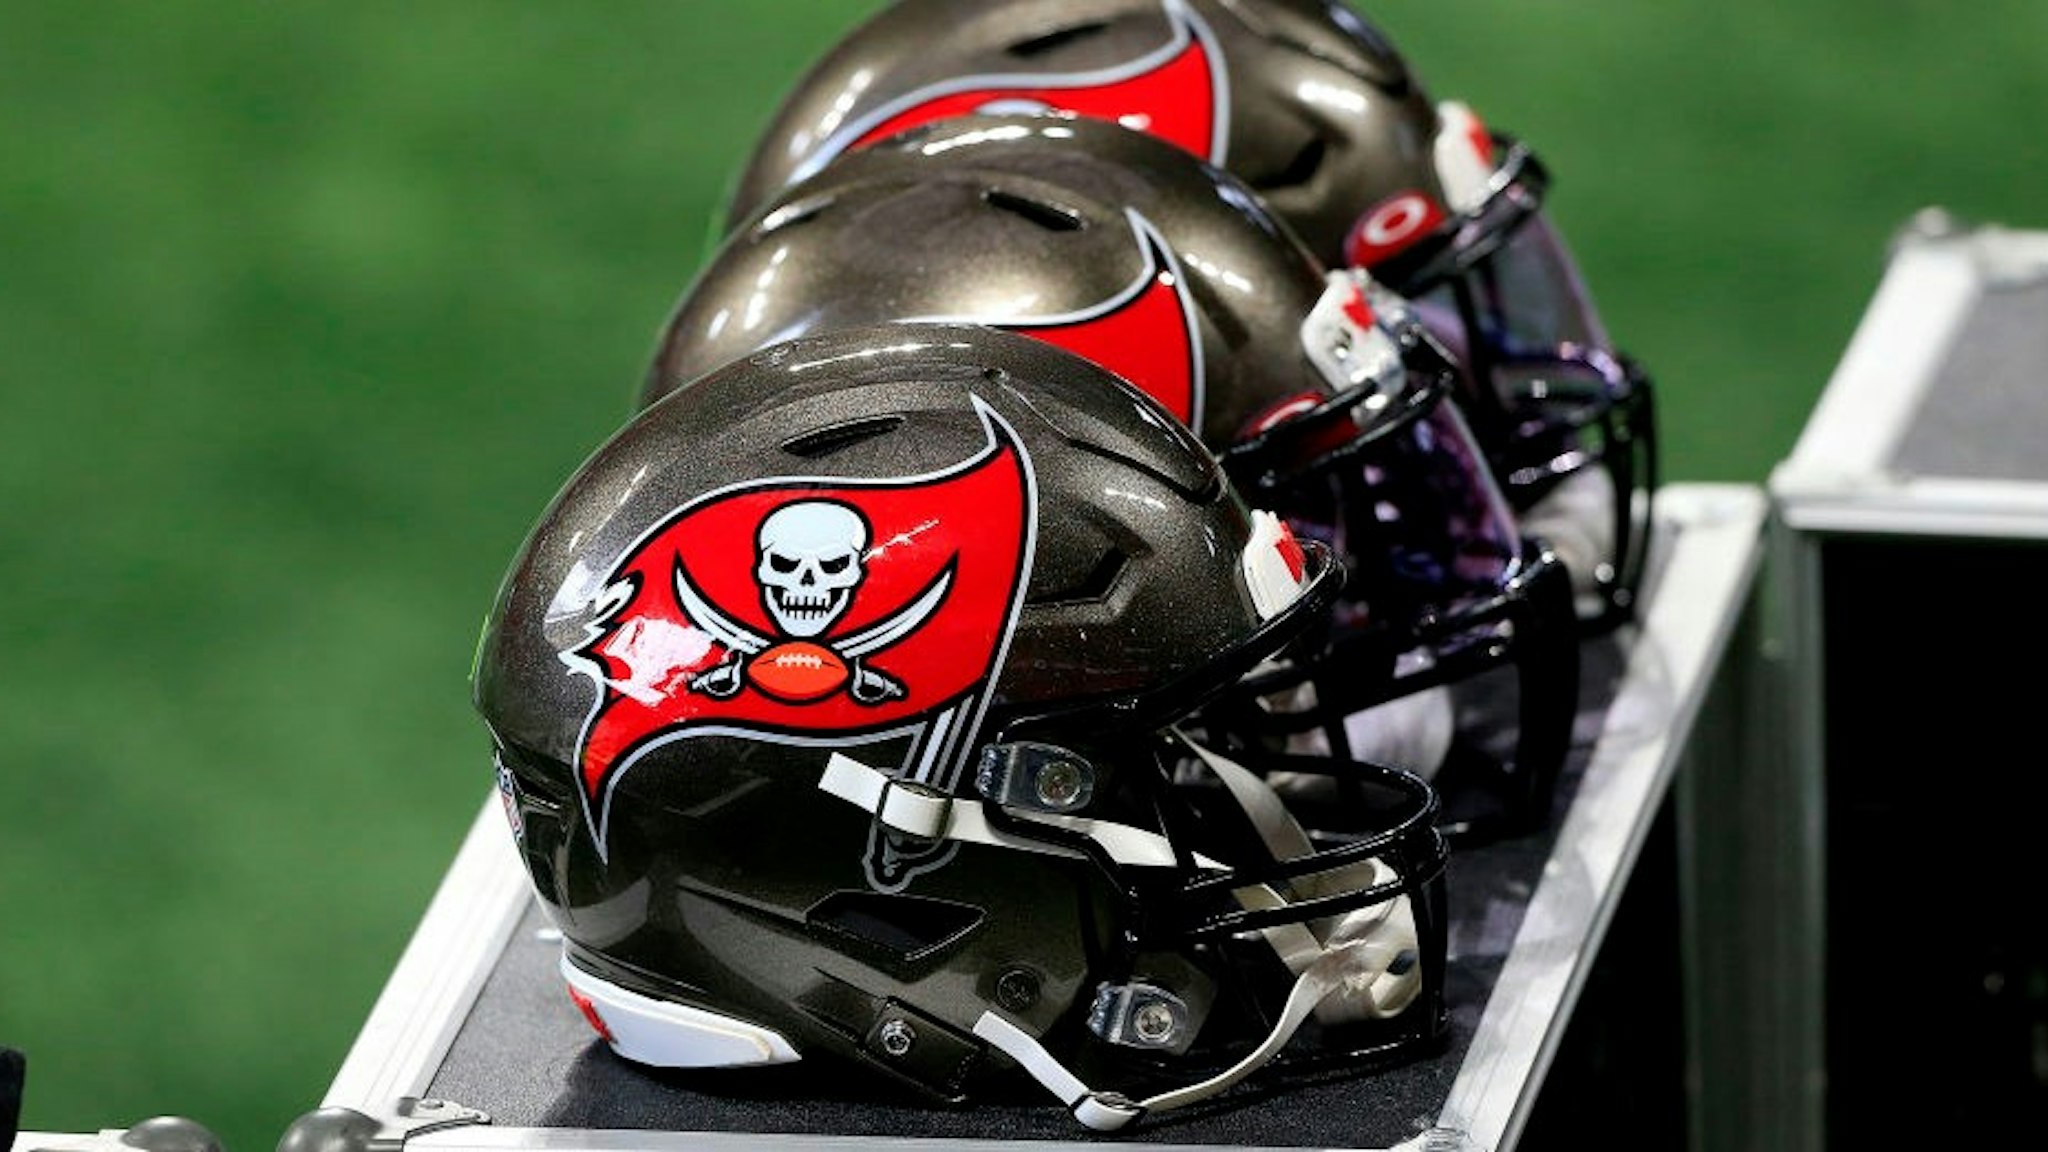 ATLANTA, GA - DECEMBER 20: Tampa Bay helmets on the sidelines during warmups for the Week 15 NFL game between the Atlanta Falcons and the Tampa Bay Buccaneers on December 20, 2020 at Mercedes-Benz Stadium in Atlanta, Georgia. (Photo by